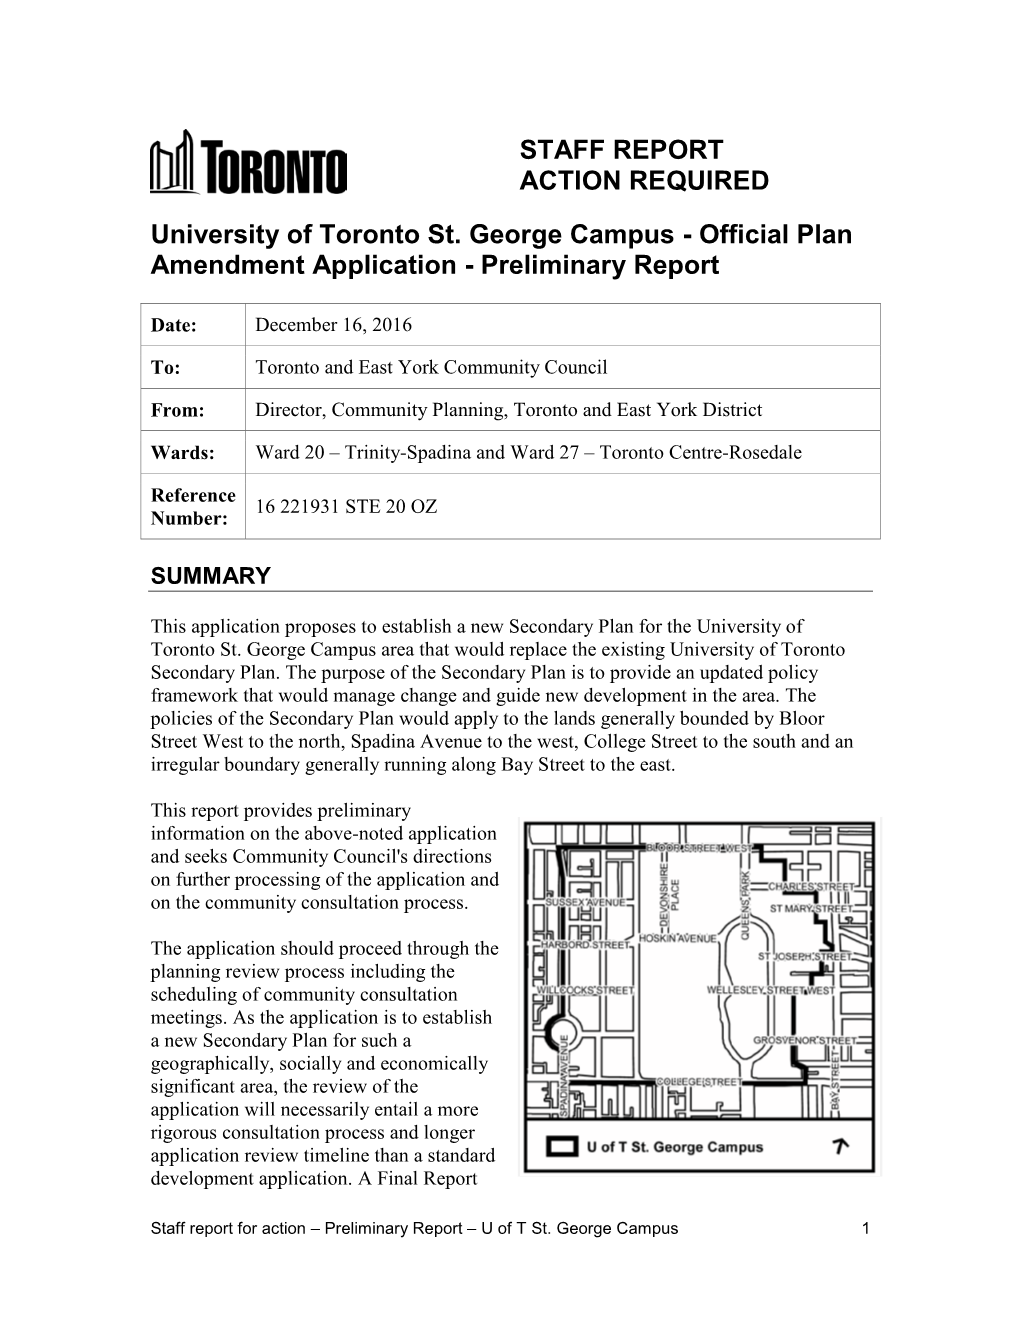 University of Toronto St. George Campus - Official Plan Amendment Application - Preliminary Report